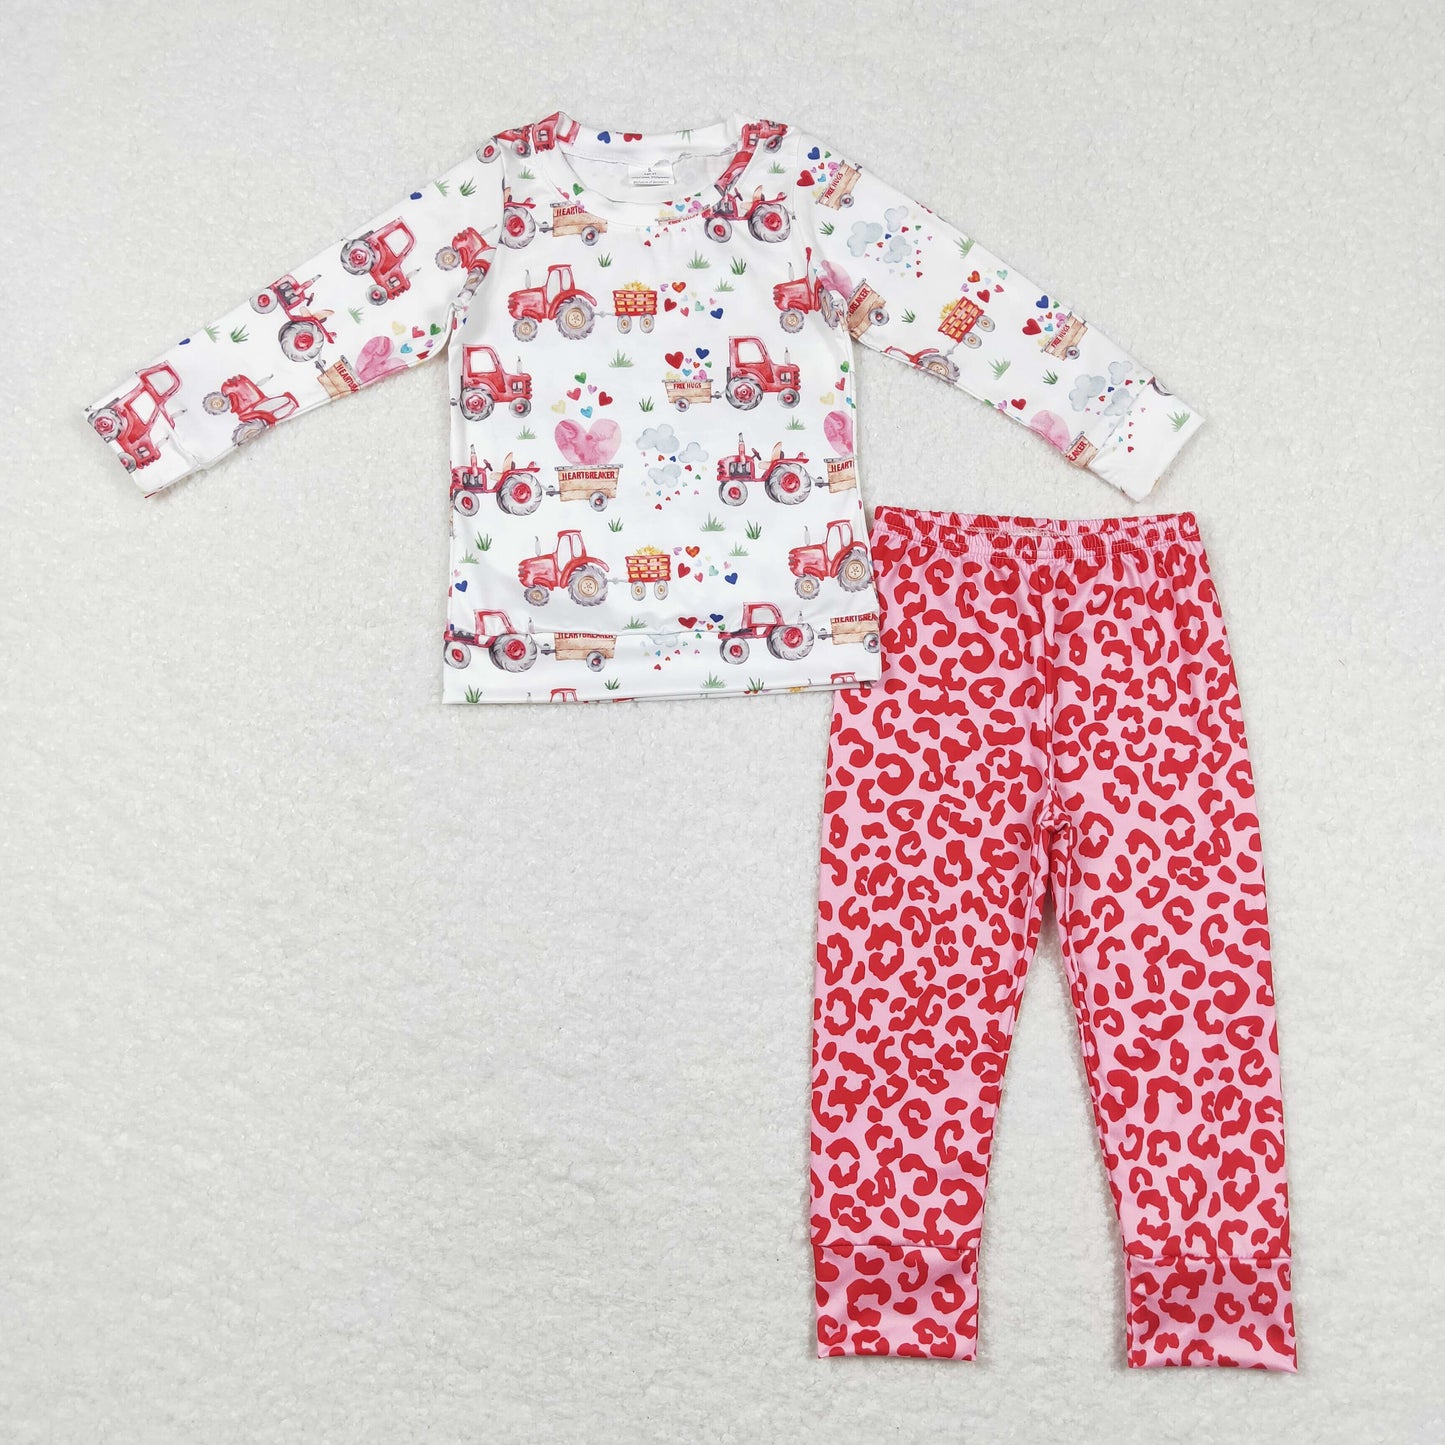 baby girl valentines truck top leopard leggings outfit